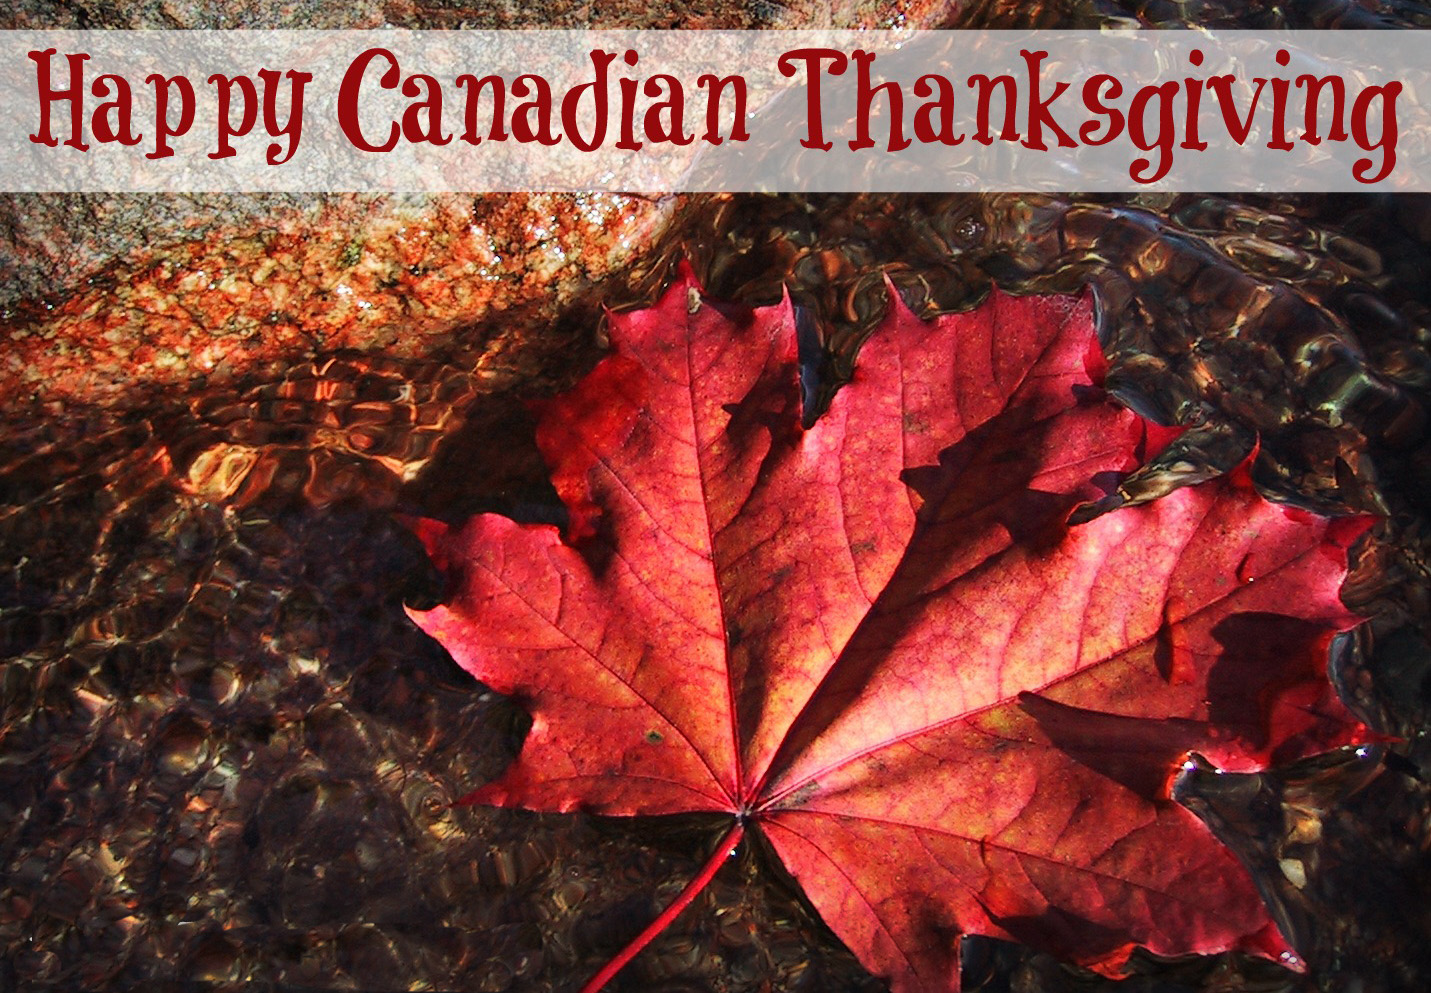 Happy Thanksgiving from Canadian Ambassador Peter McGovern